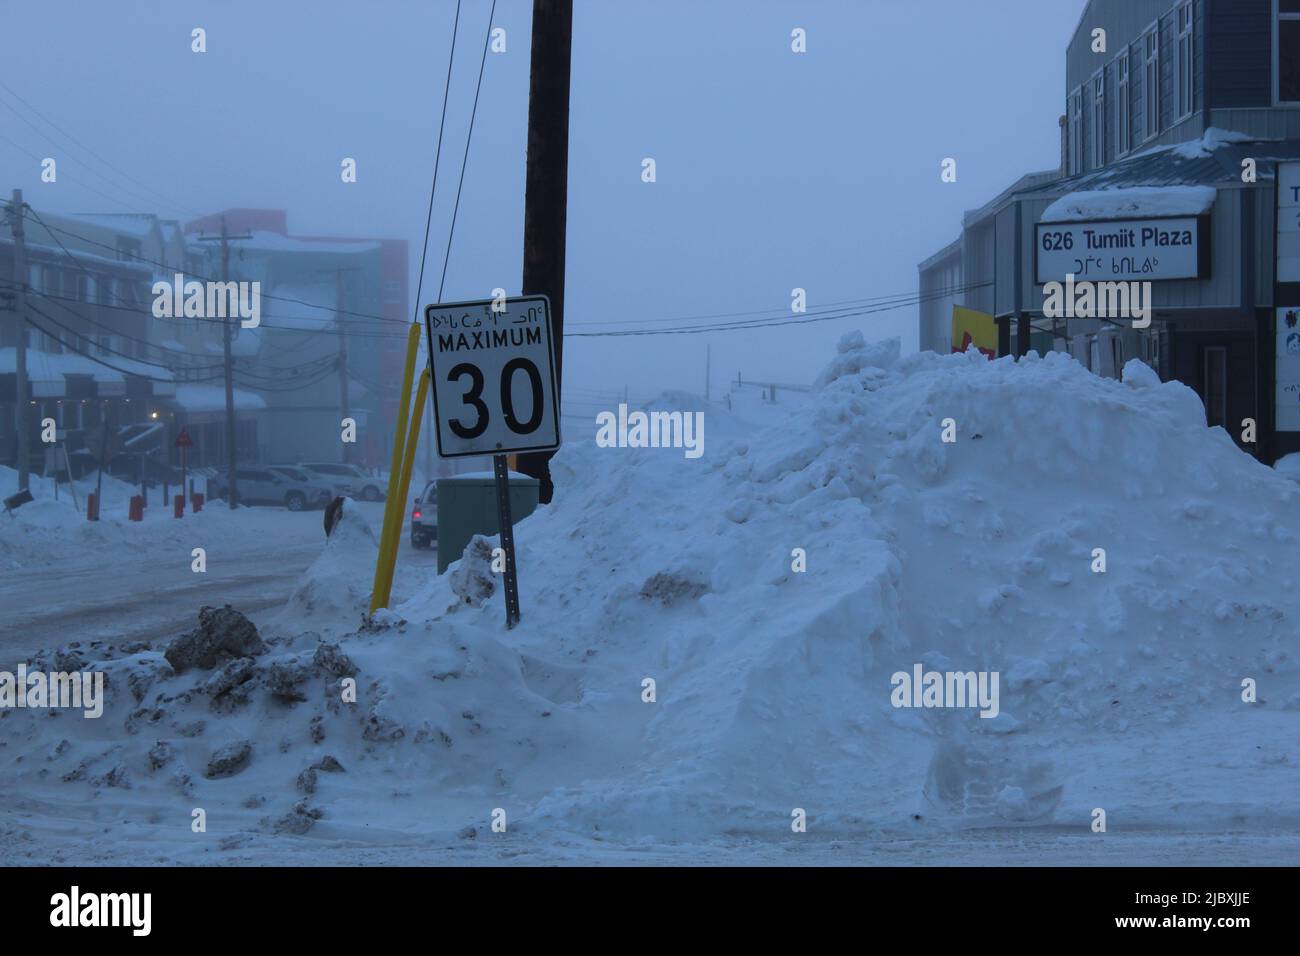 Road sign and snow dump In Iqaluit, Nunavut, Canada on a cloudy day Stock Photo